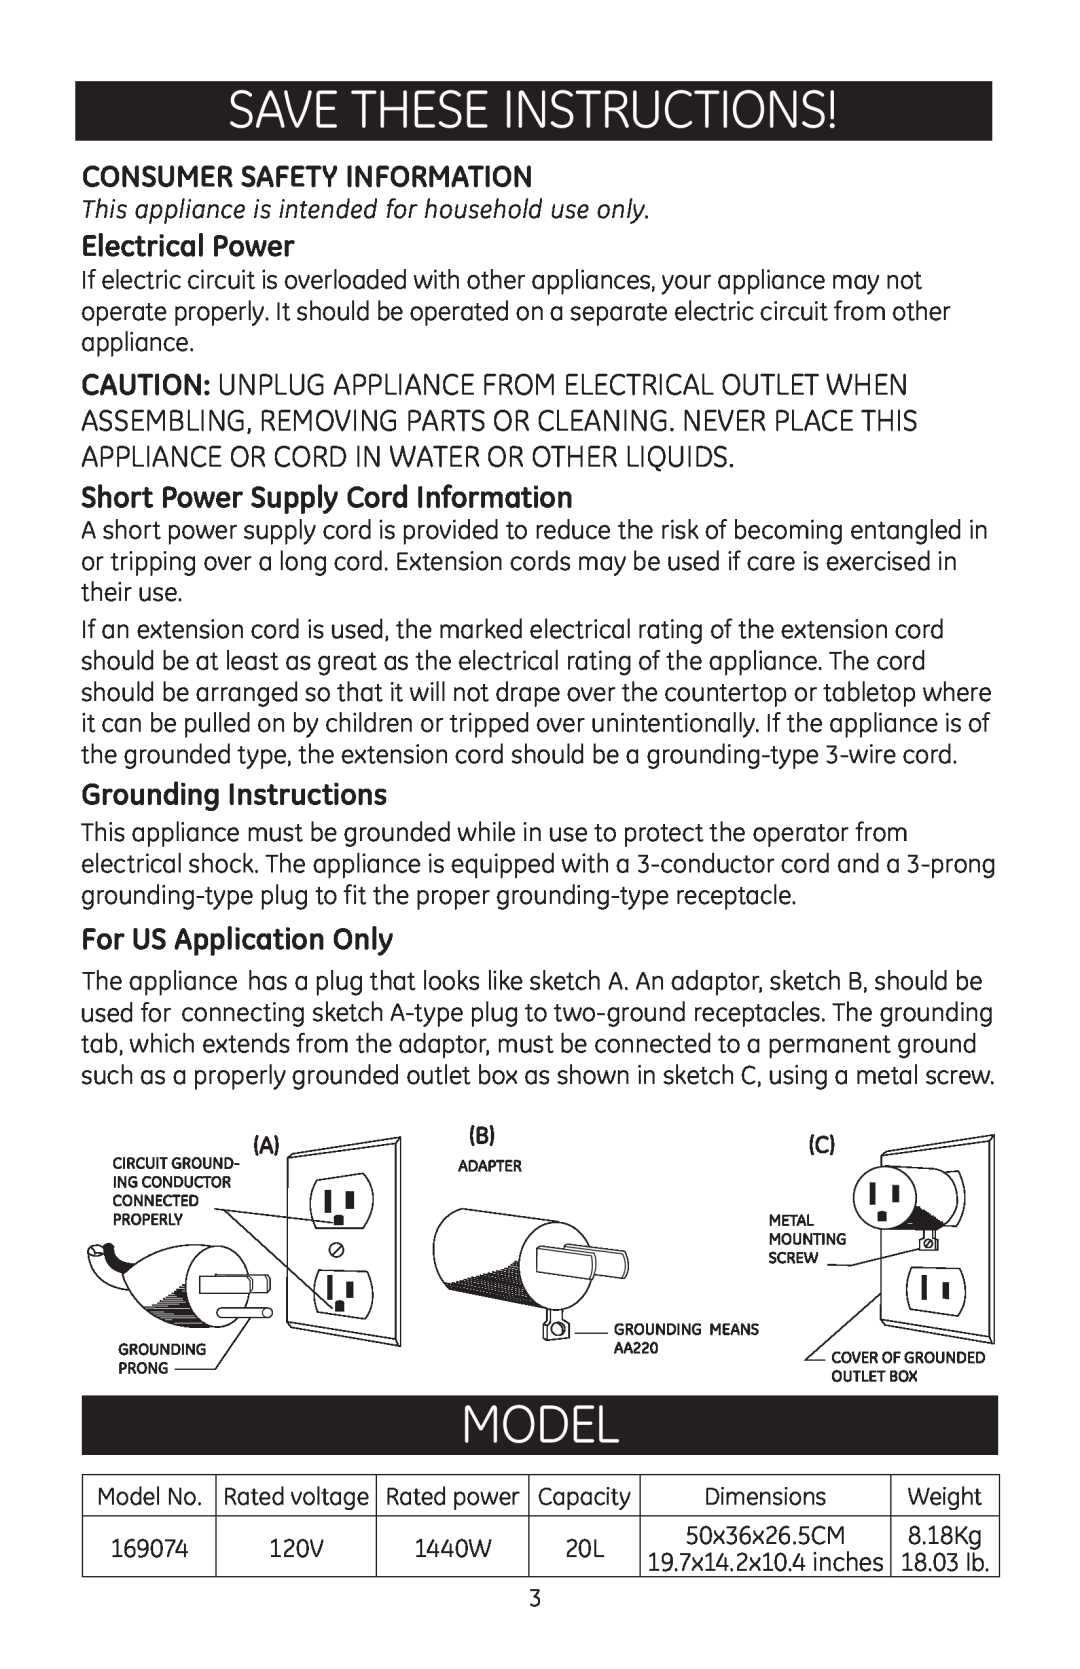 GE 169074 manual Save These Instructions, Model, Consumer Safety Information, Electrical Power, Grounding Instructions 